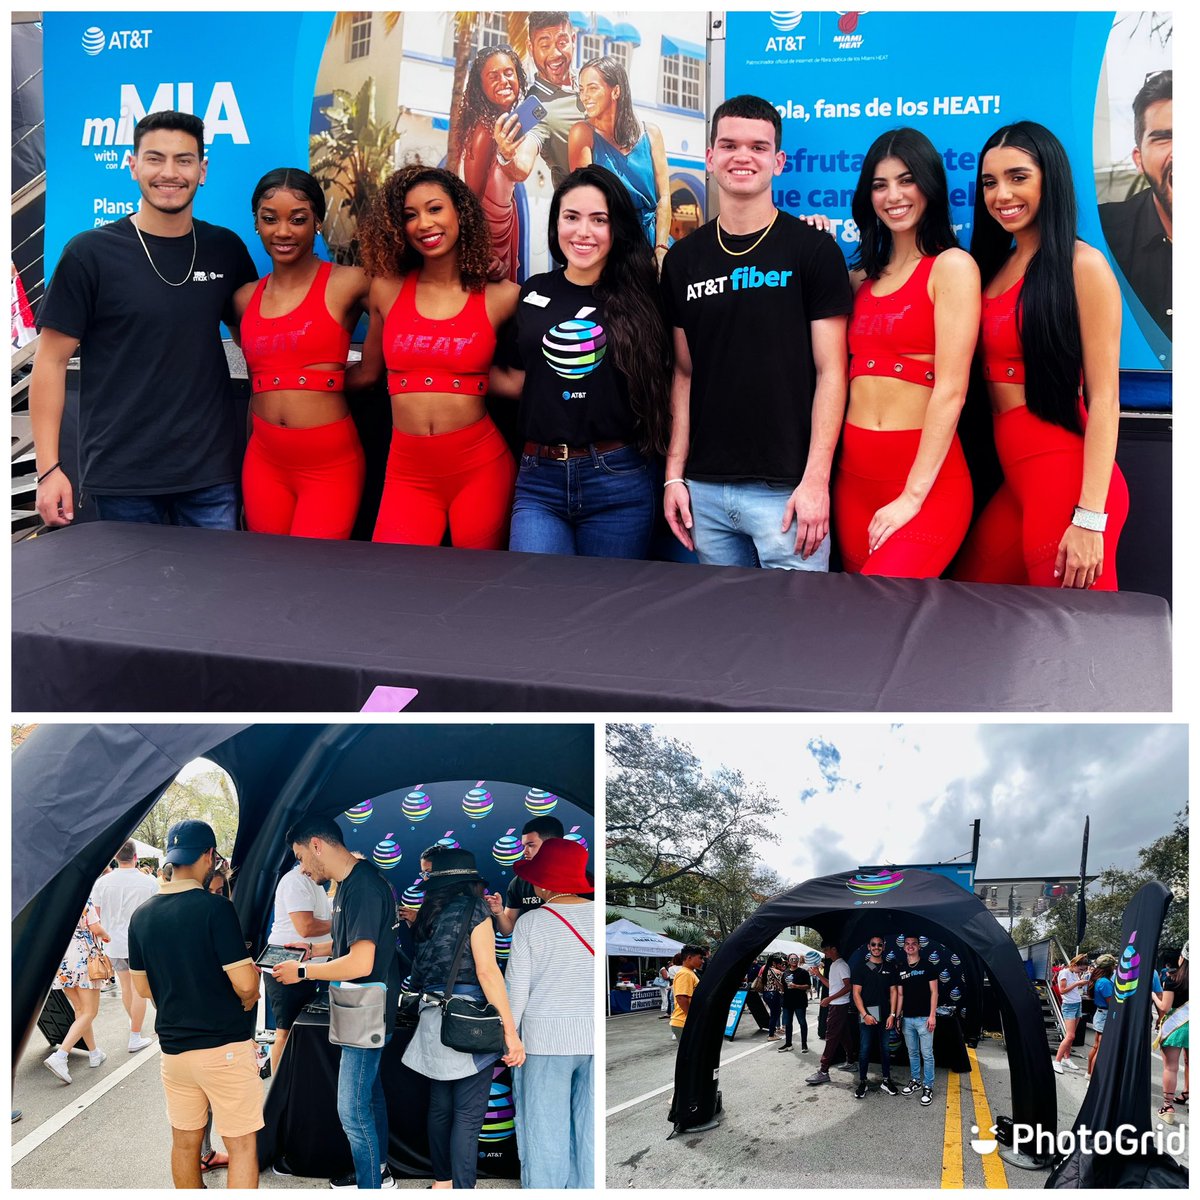 What an amazing & successful weekend at the #CarnavalOnTheMile! @MiamiHEAT dancers and all🤩
.
Coral Gables COR store & our @Cellular_Touch partners did a tremendous job each day, thank you @OneflaC for such a great event!
.
@eniggemann @efrenfavela @One_FLA @OneFLASignature